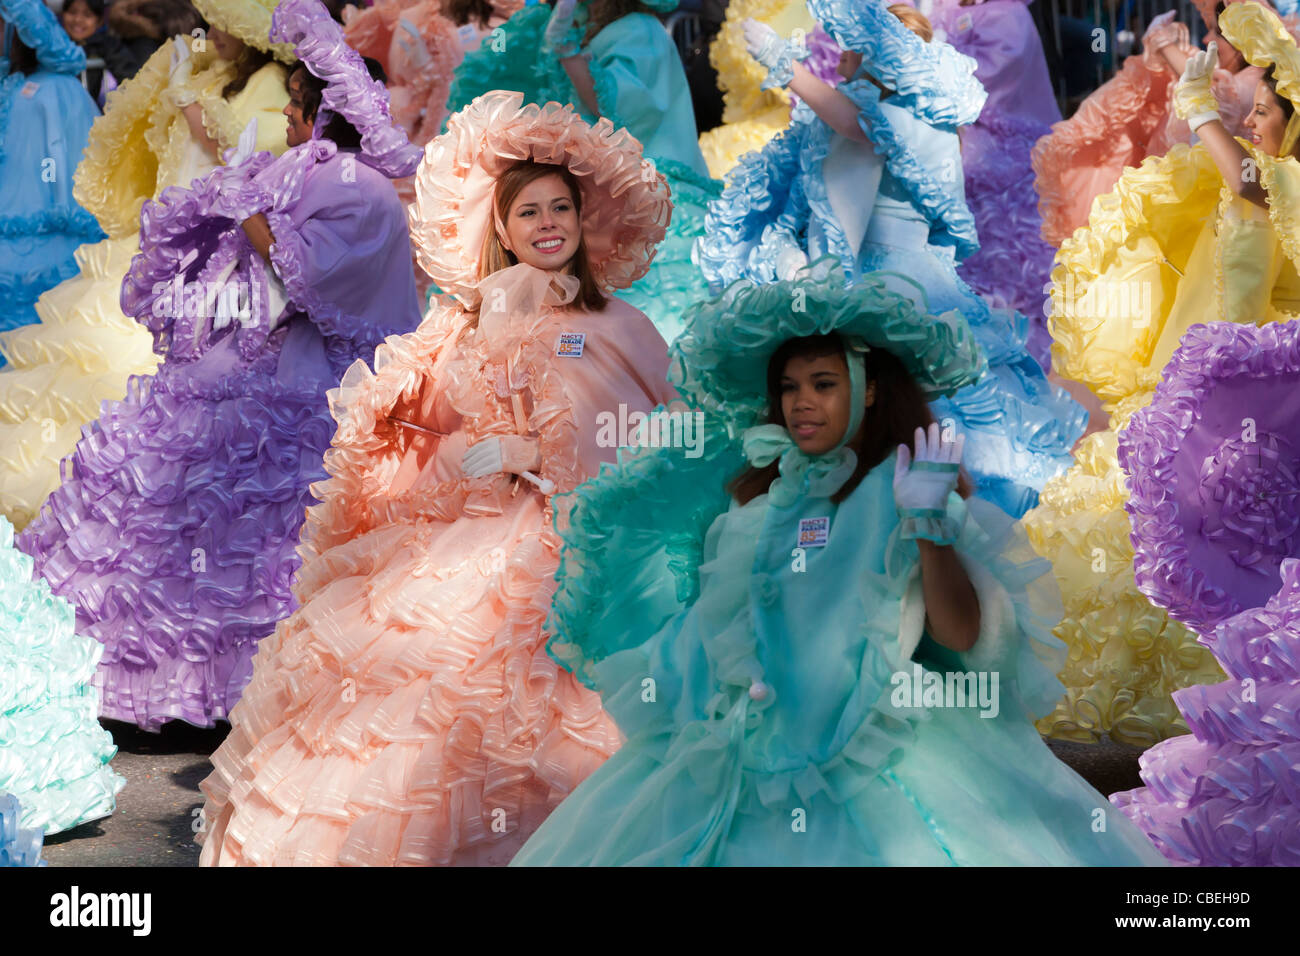 The Mobile Azalea Trail Maids perform during the 2011 Macy's Thanksgiving Day Parade in New York City. Stock Photo